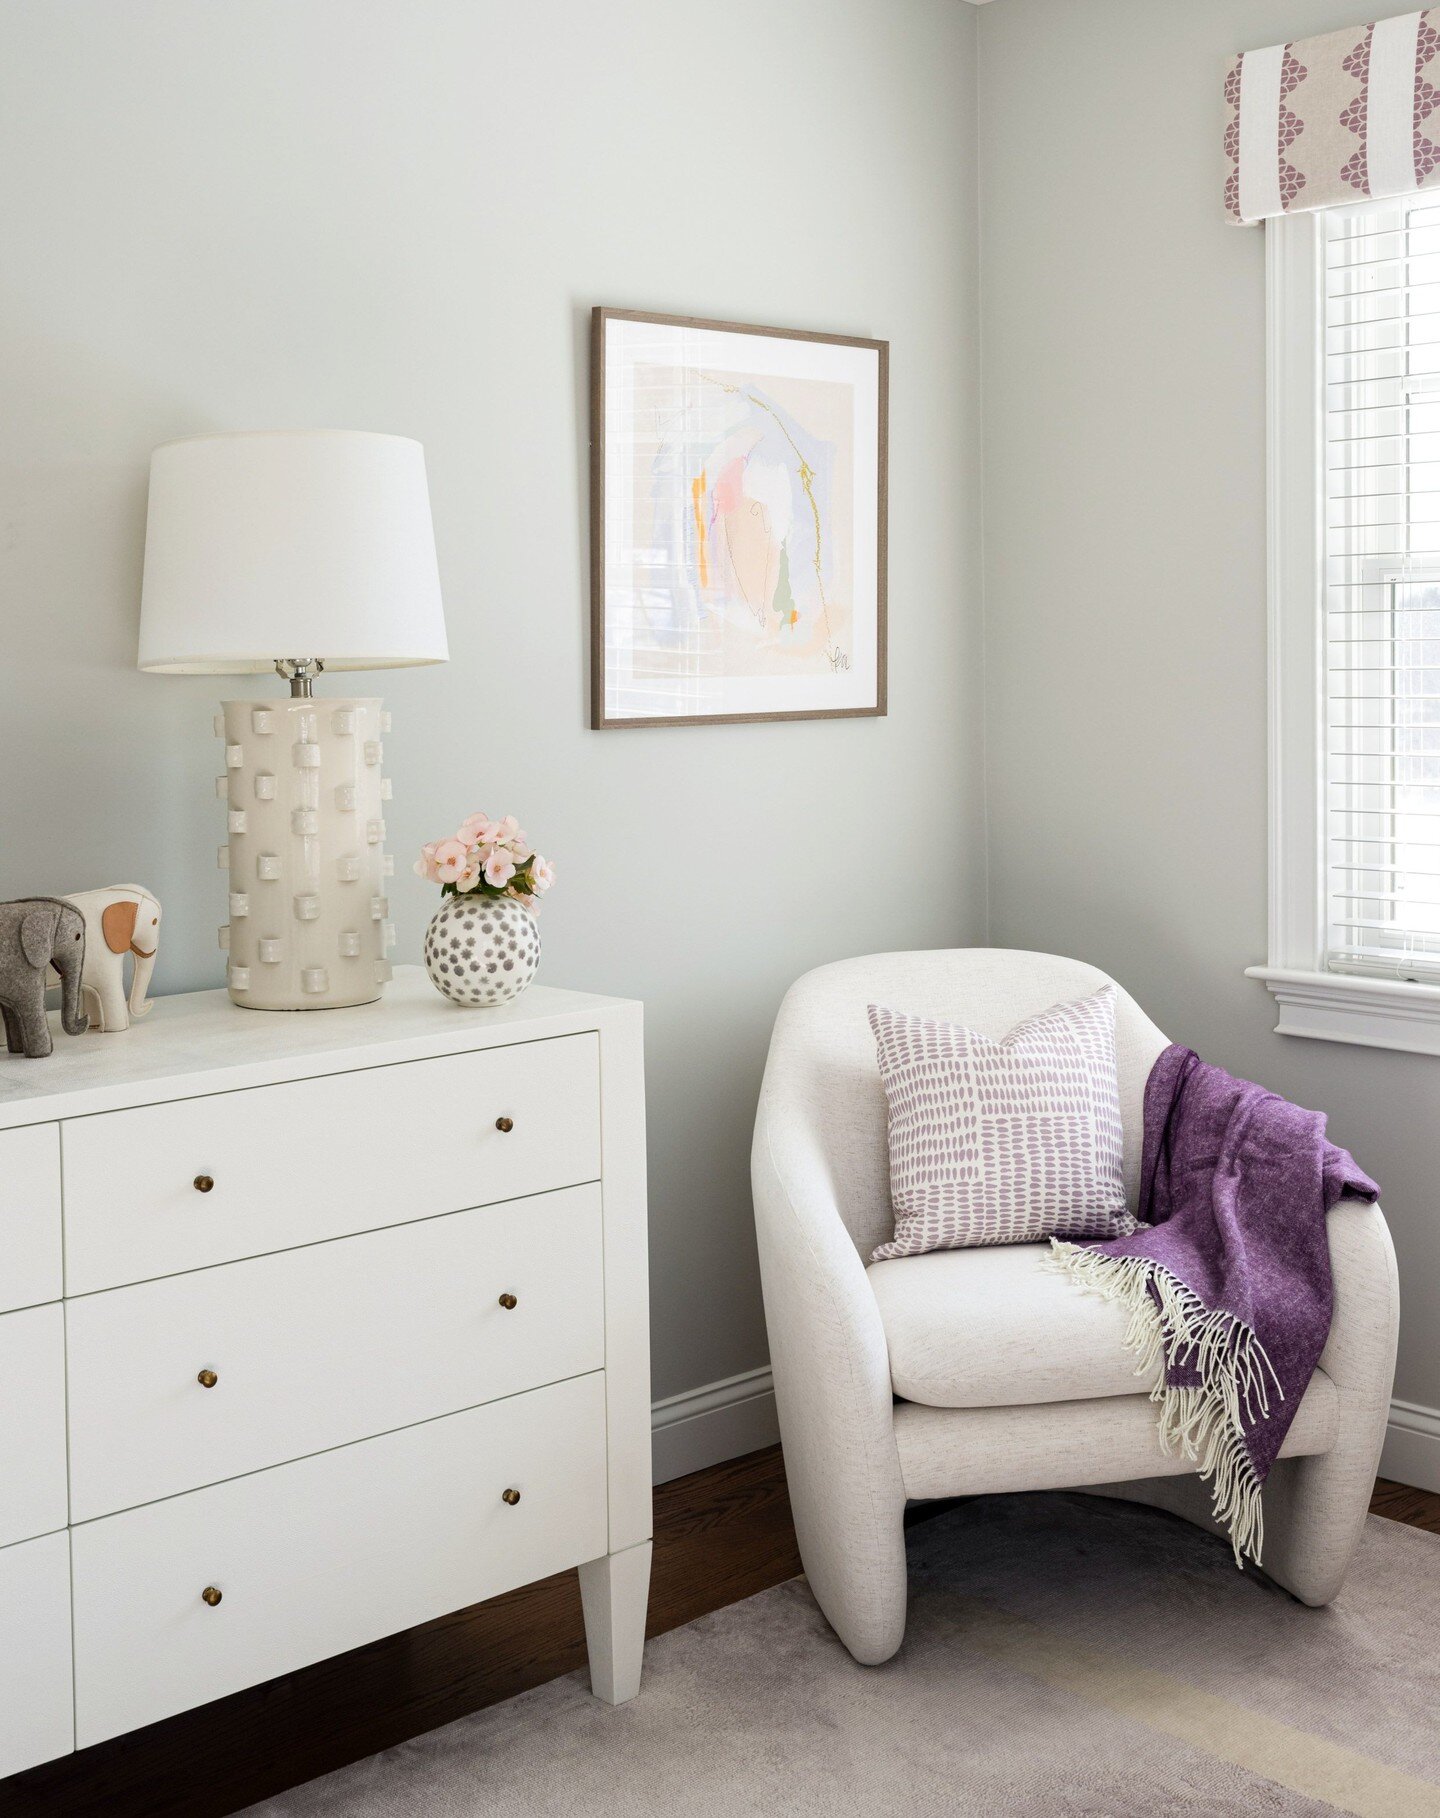 This girls room from our Concord project is a relaxing retreat with soft neutrals and pops of purple. 
Design: @stylehouseboston